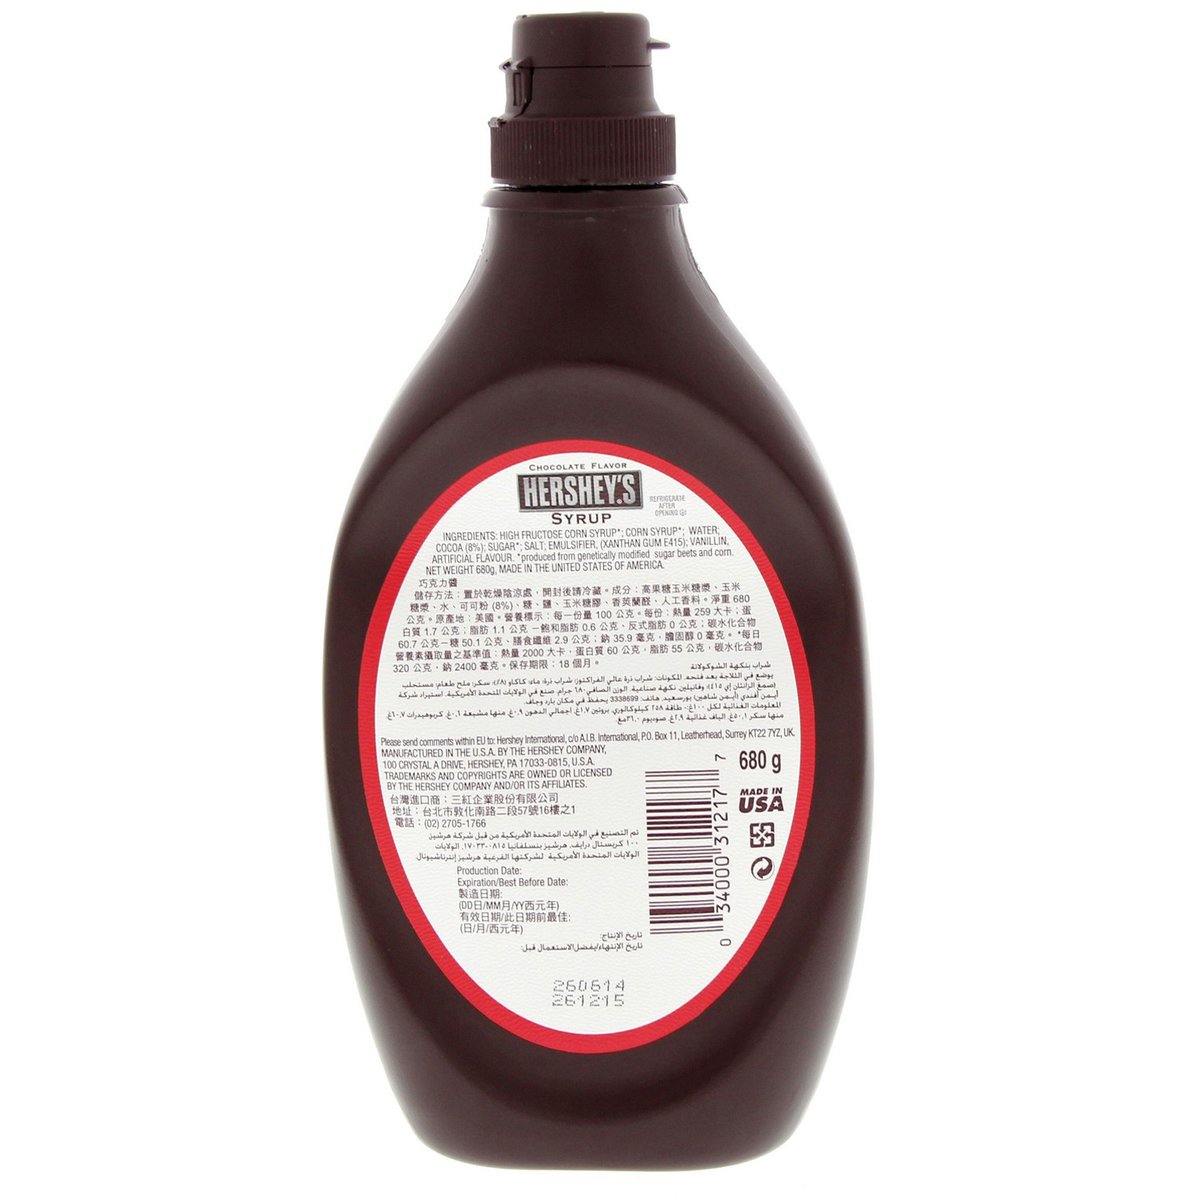 Hershey's Chocolate Flavour Syrup 680 g